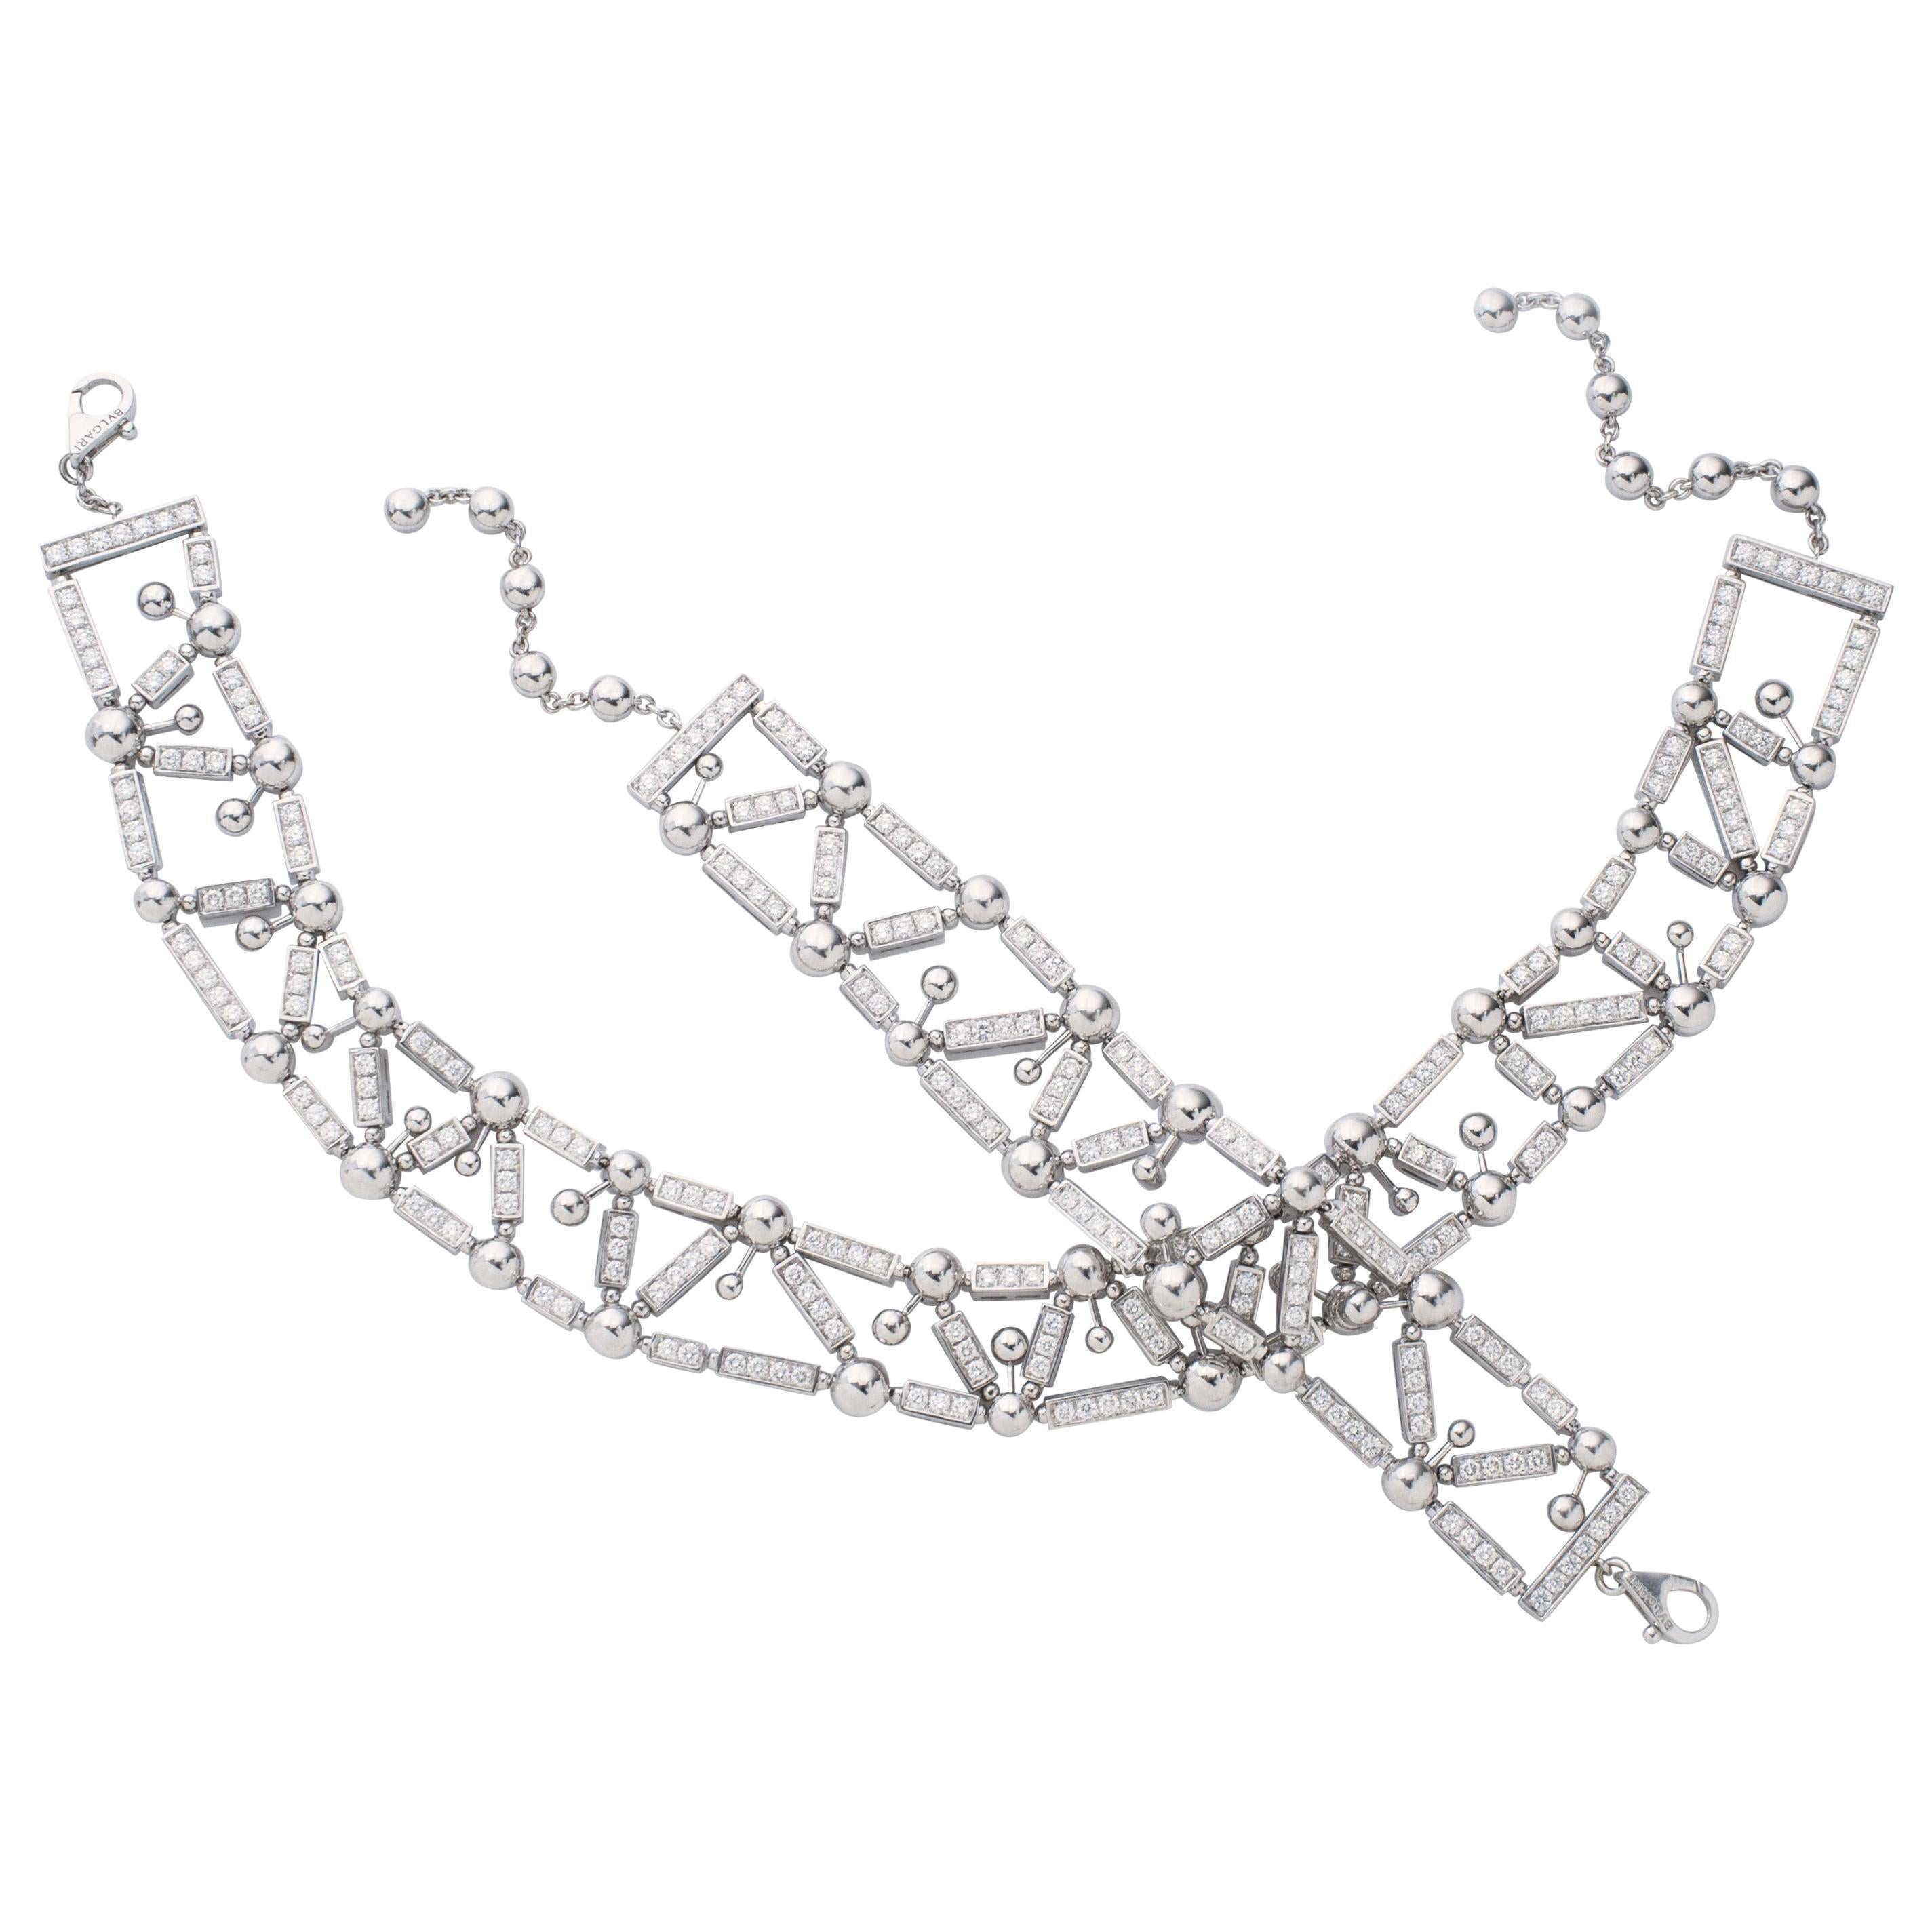 Bvlgari Fireworks Collection Diamond Choker Necklace and Bracelet in 18kw Gold